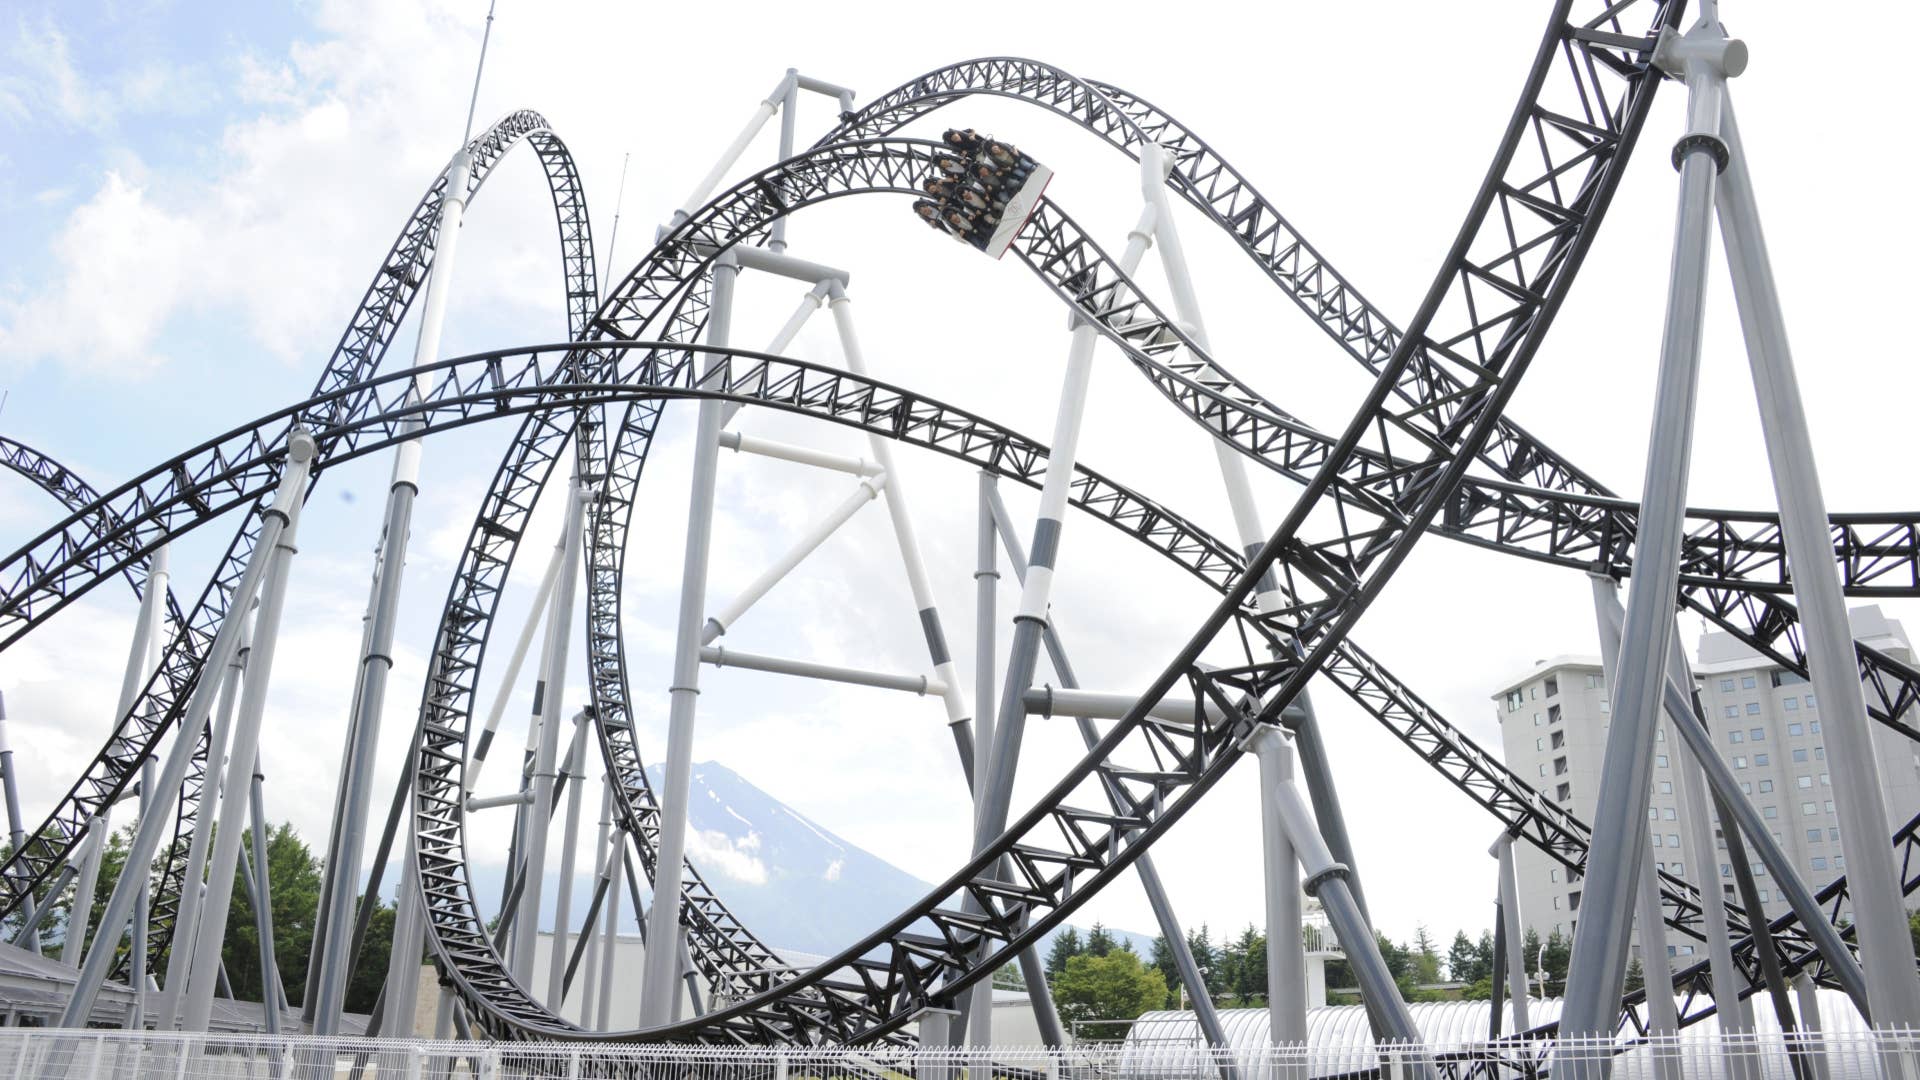 People react as they ride on Fuji-Q Highland amusement park world's steepest roller coaster "Takabisha."